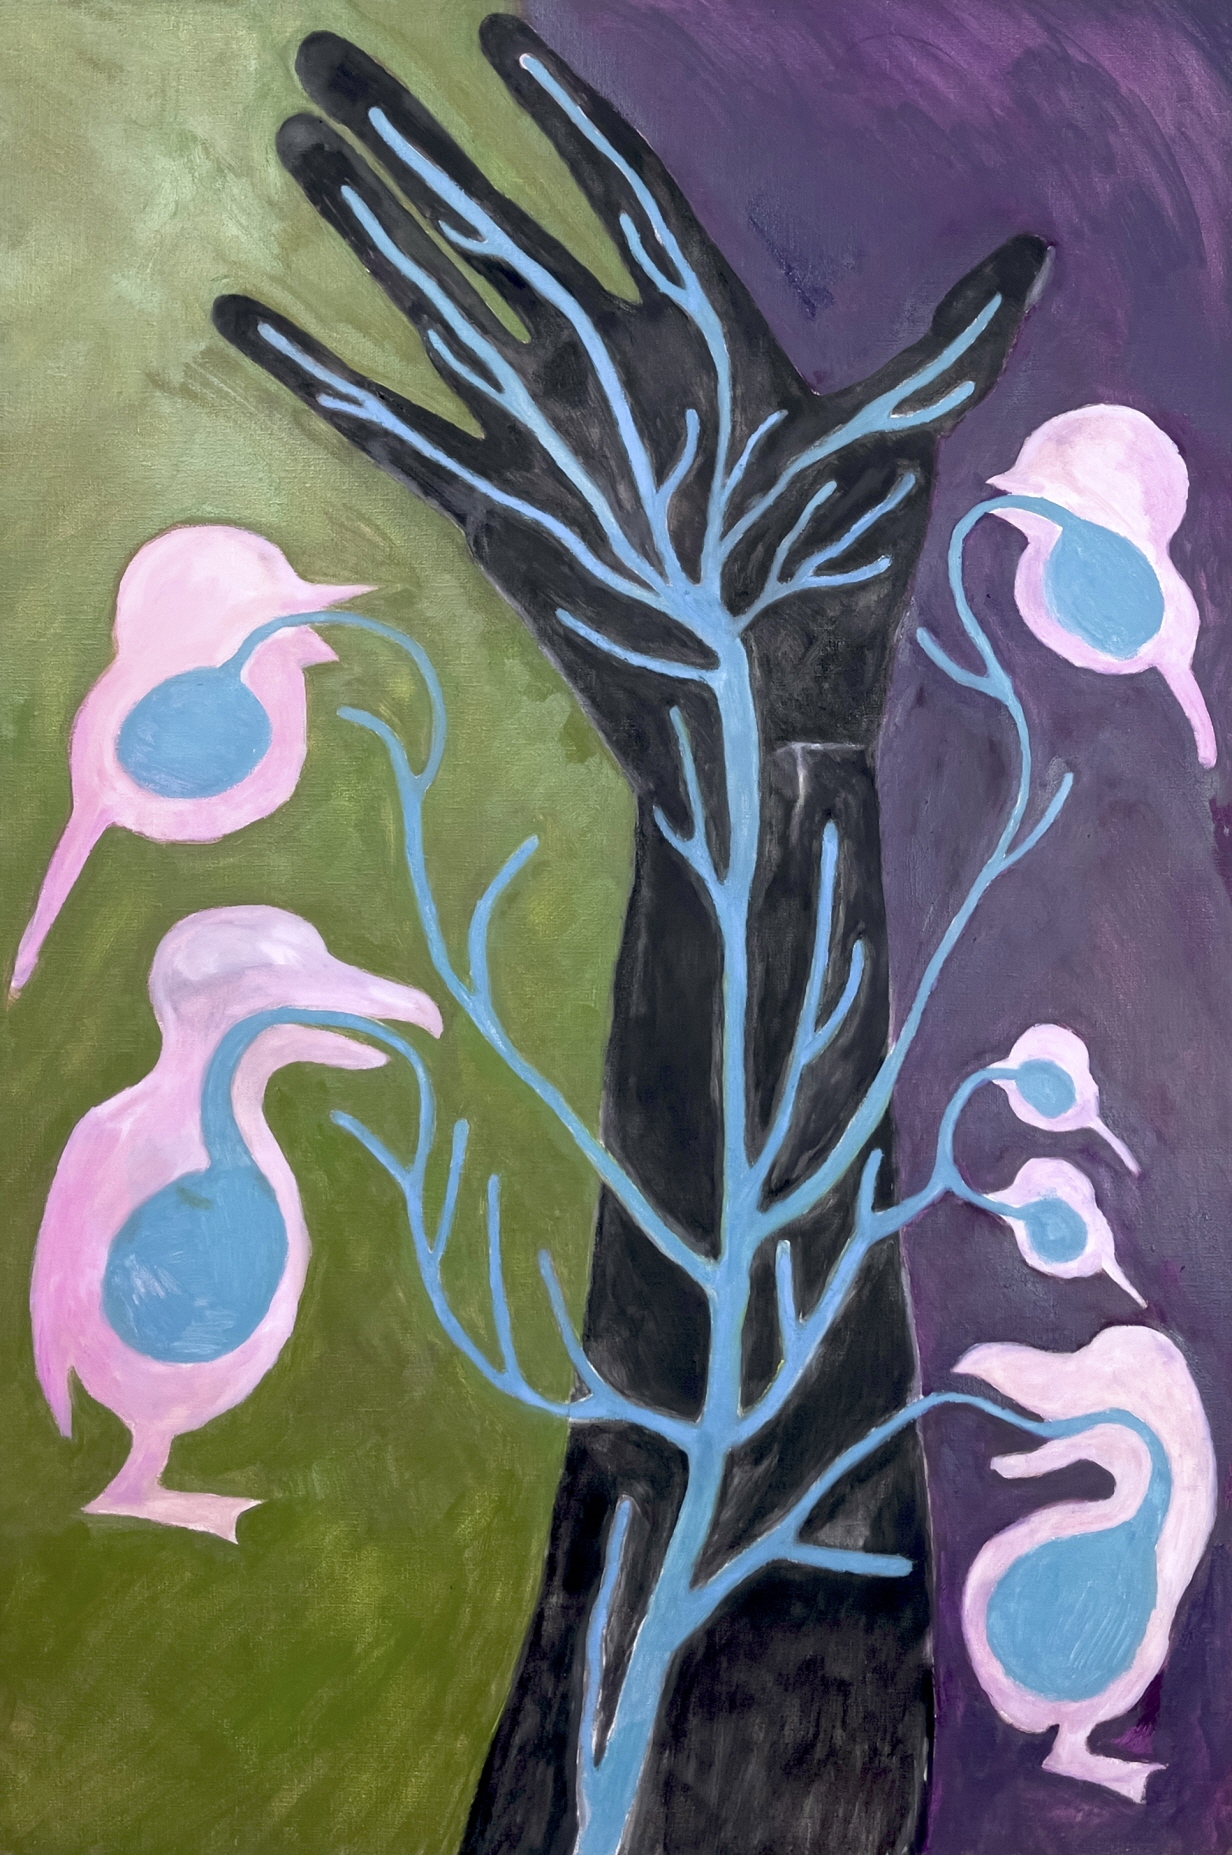 Treed Codependency(Feeding form veins), Oil and charcoal on canvas, 91x60.6cm, 2023